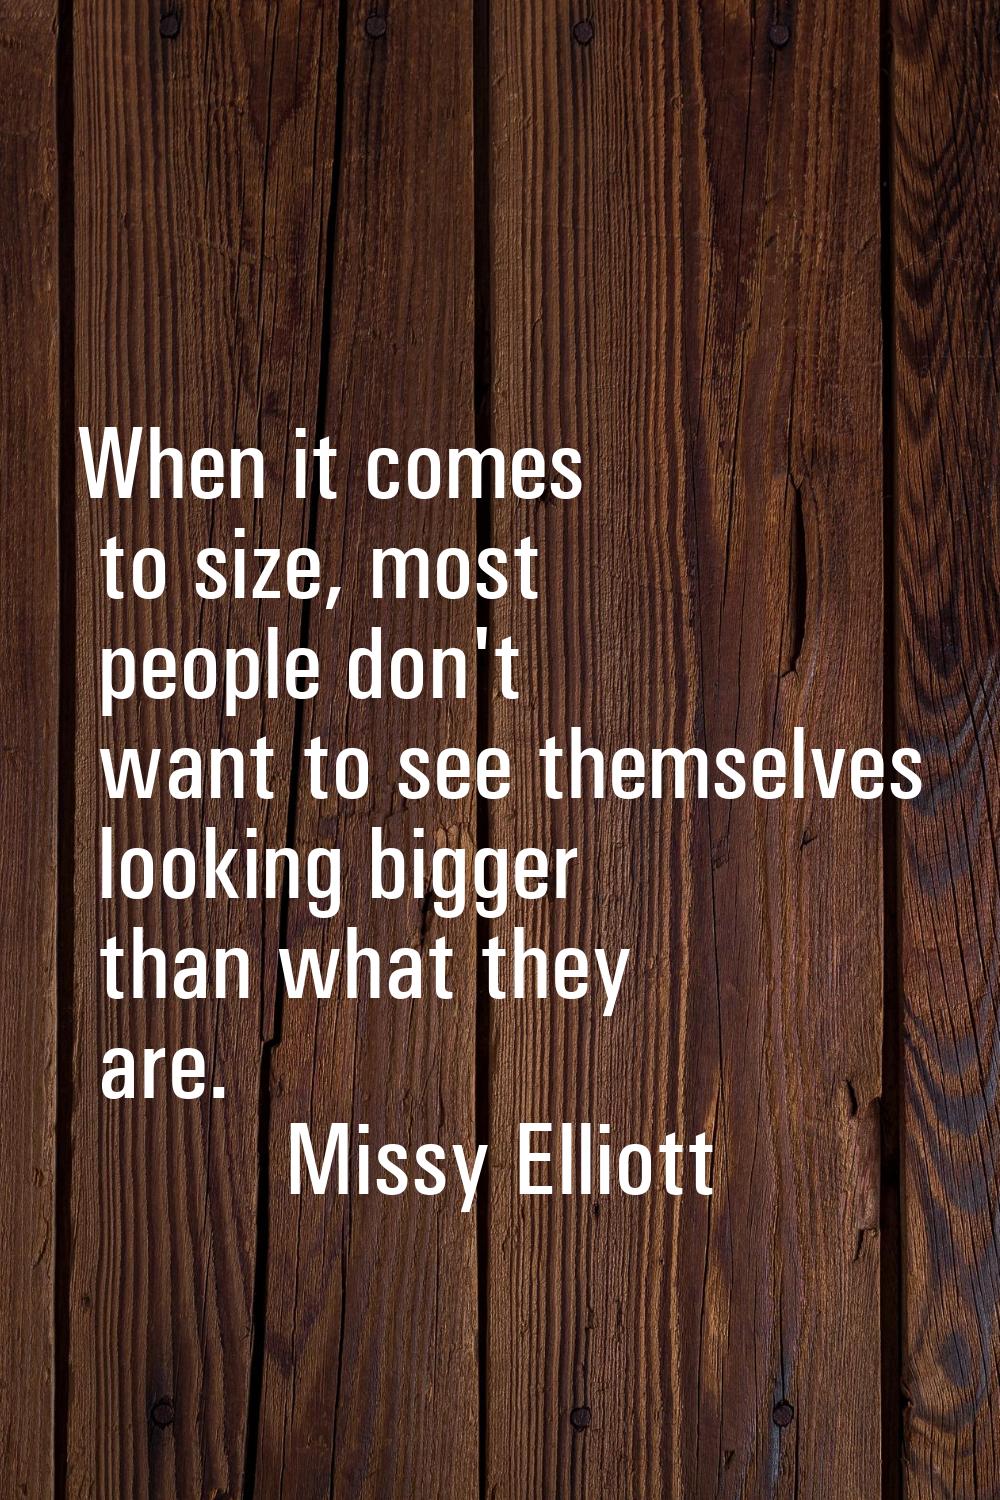 When it comes to size, most people don't want to see themselves looking bigger than what they are.